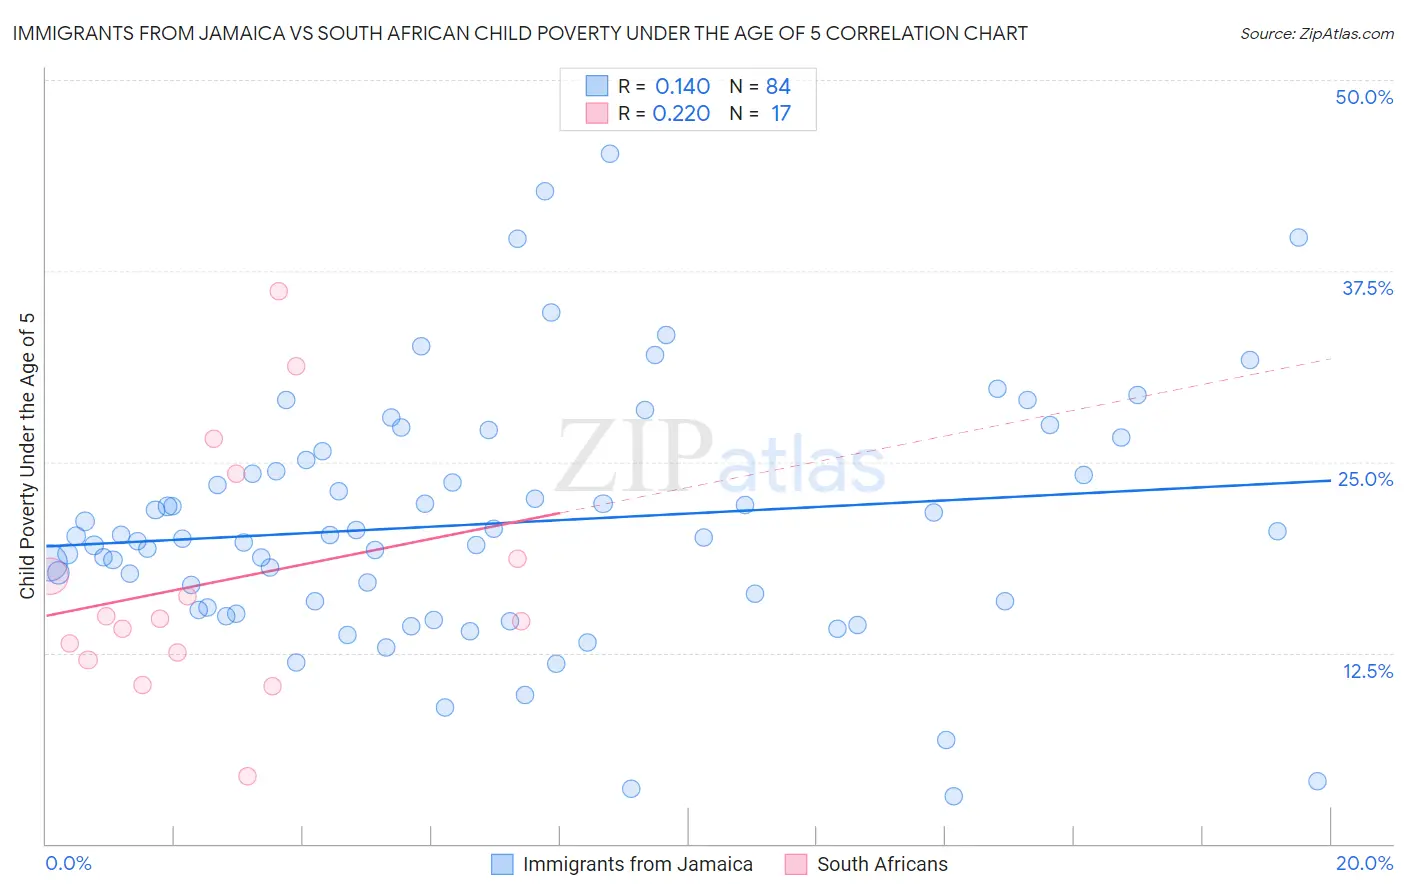 Immigrants from Jamaica vs South African Child Poverty Under the Age of 5